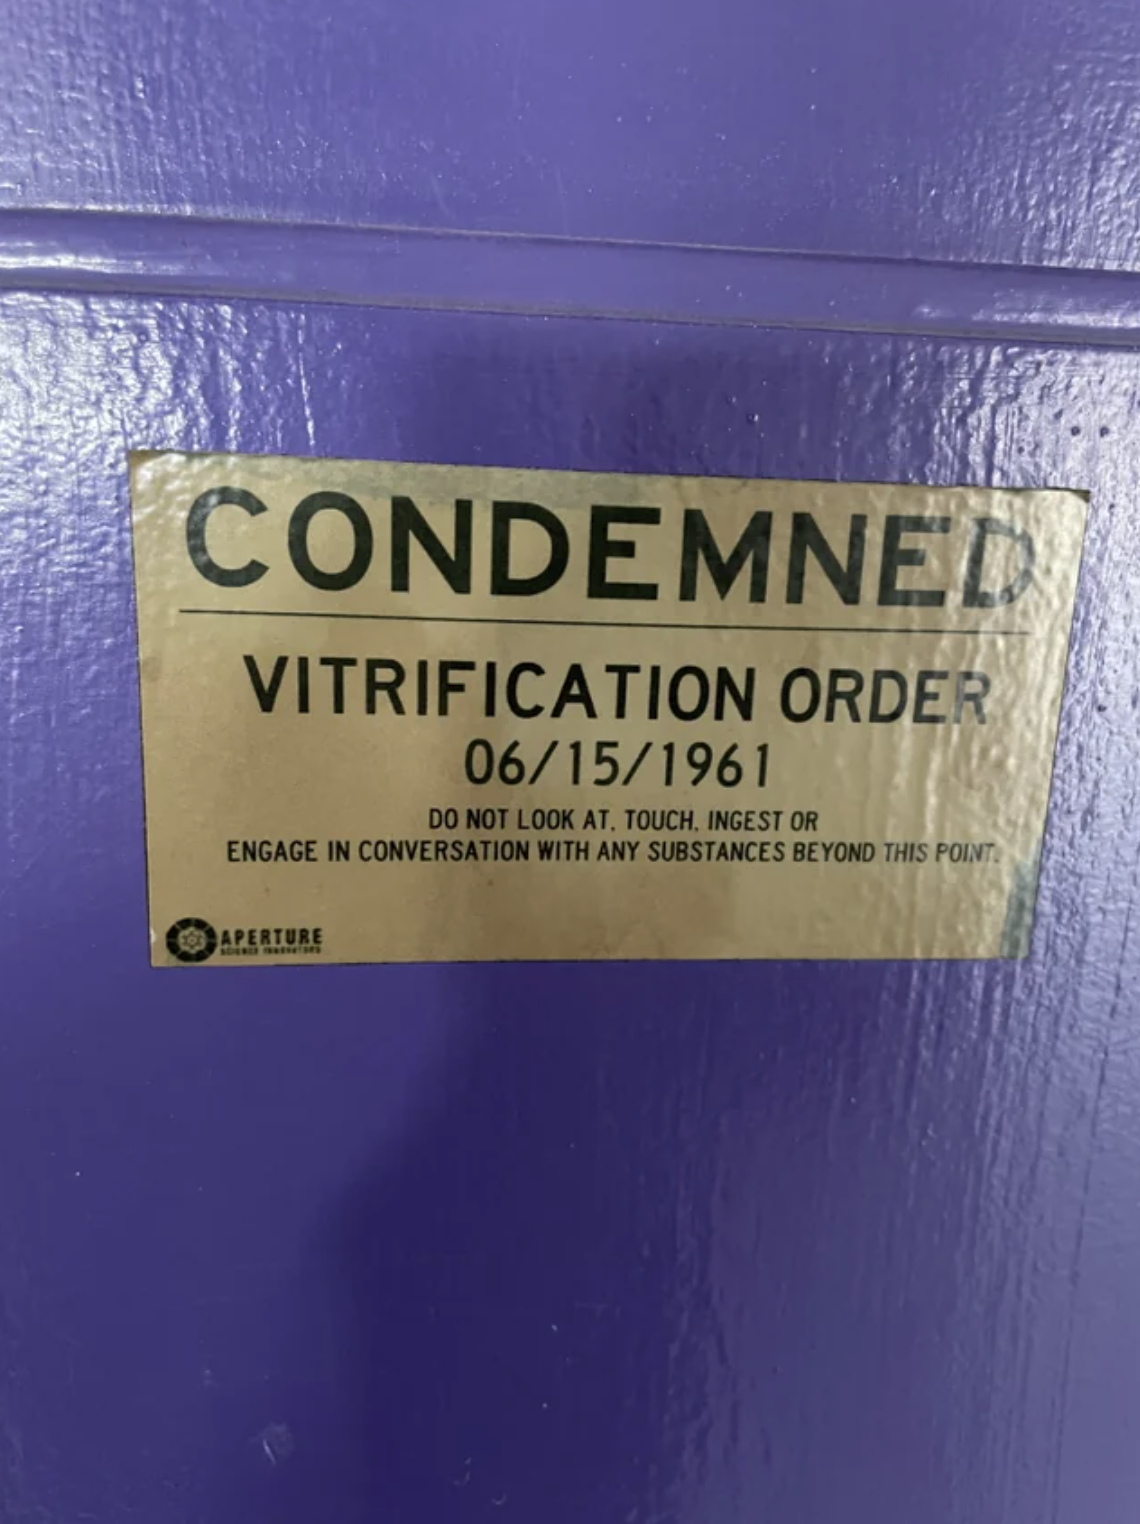 condemned verification order